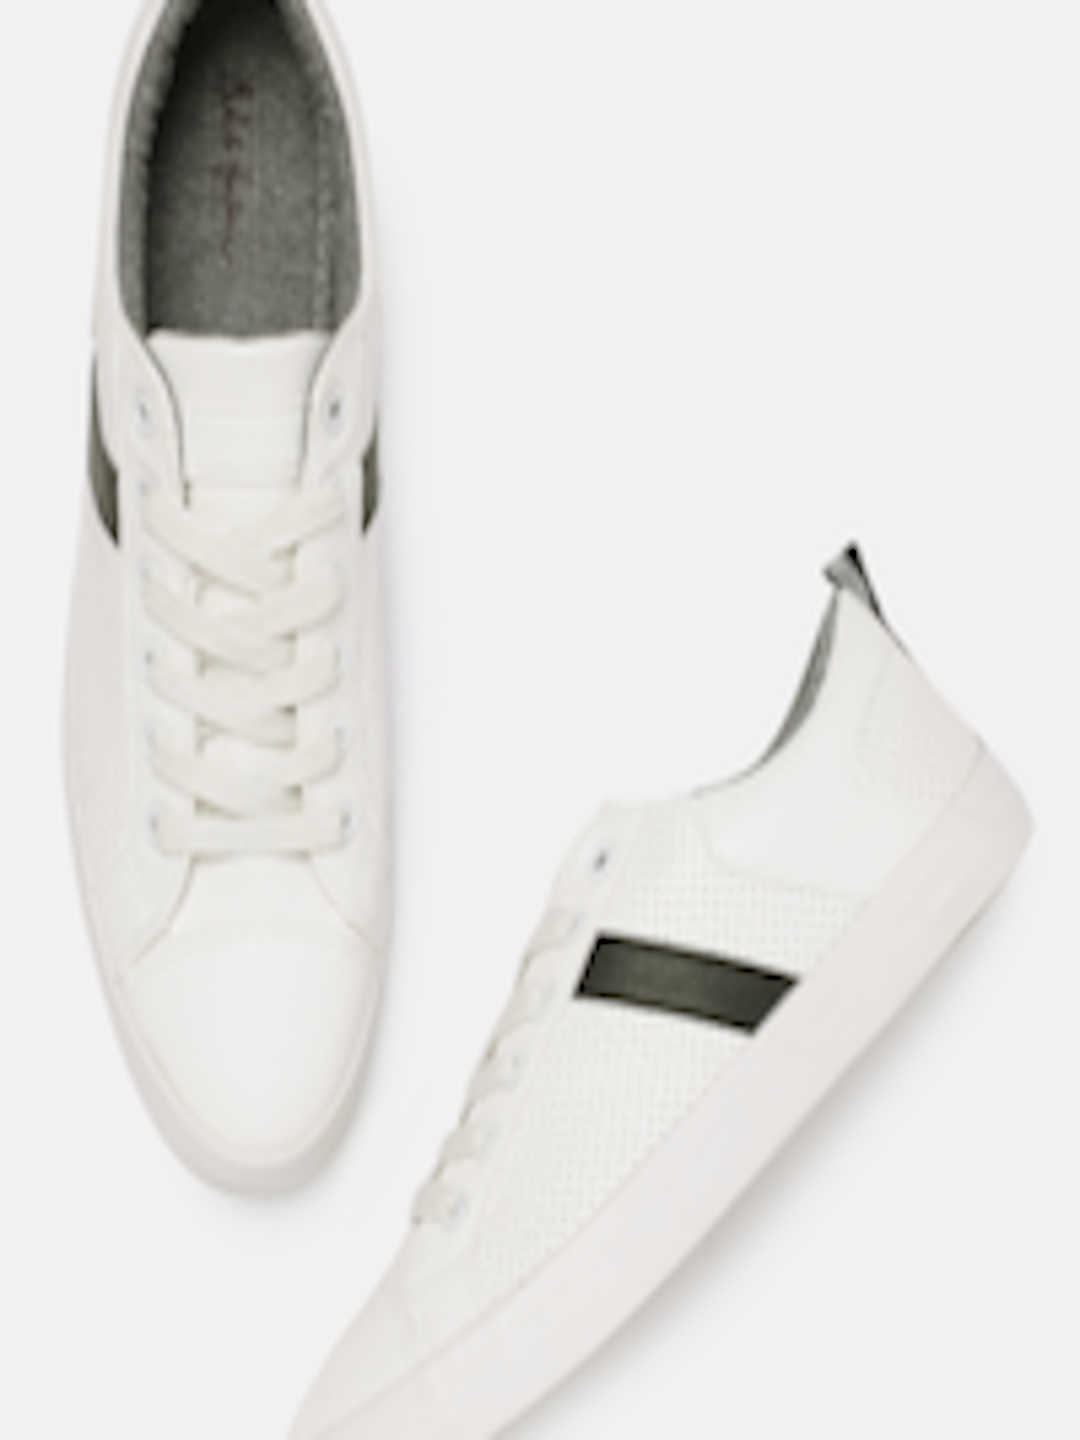 Buy Mast & Harbour Men White Sneakers - Casual Shoes for Men 8044853 ...